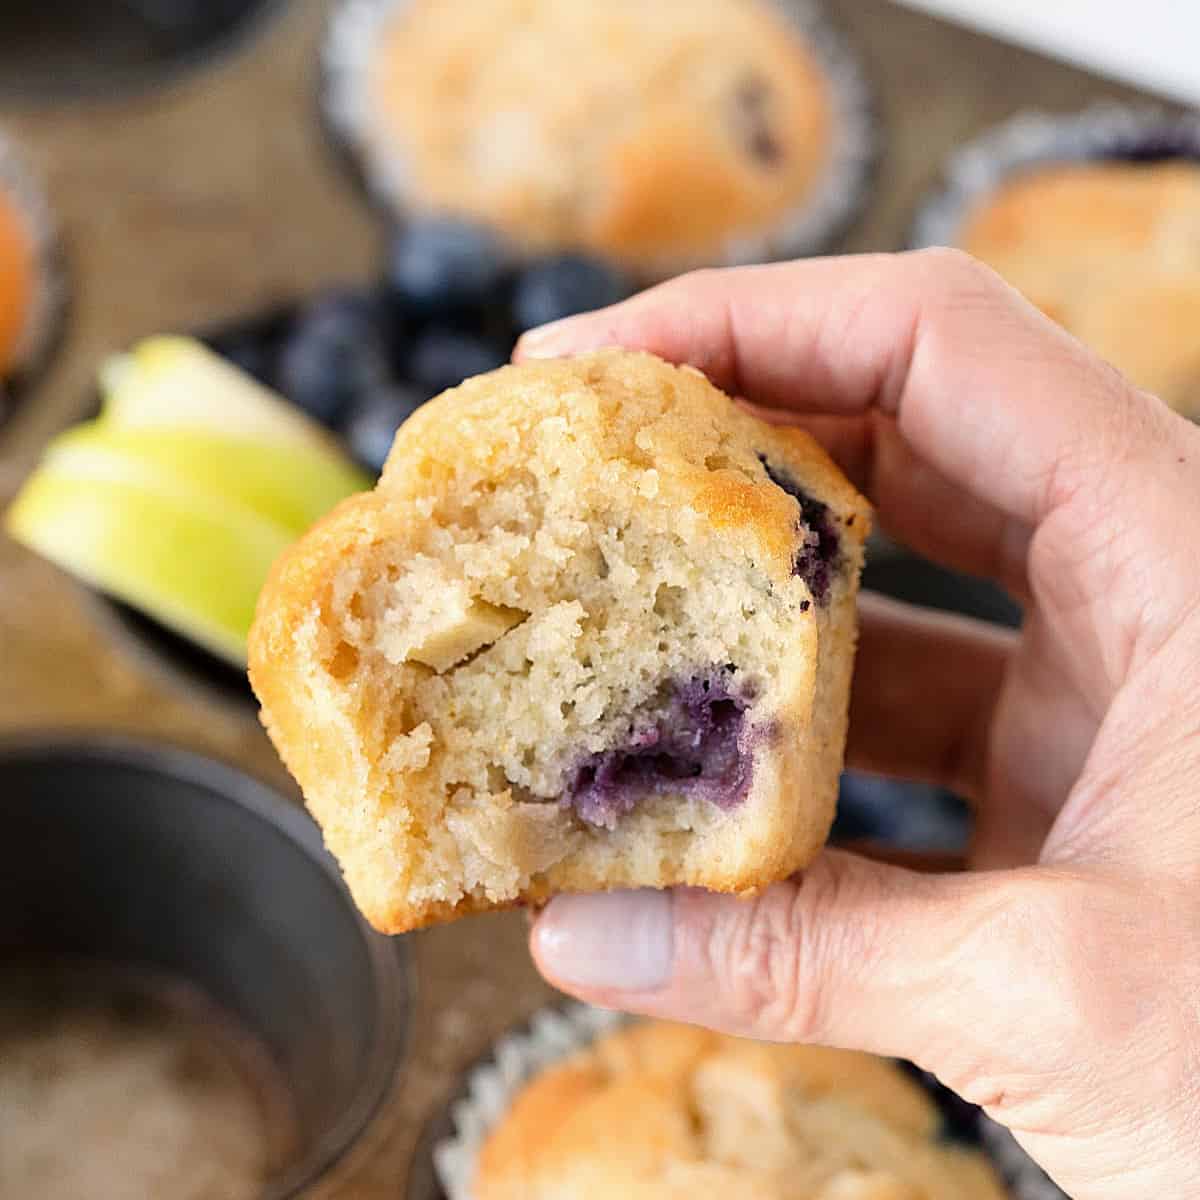 Close up of hand holding bitten apple blueberry muffin. Metal pan with more muffins and fruit below.